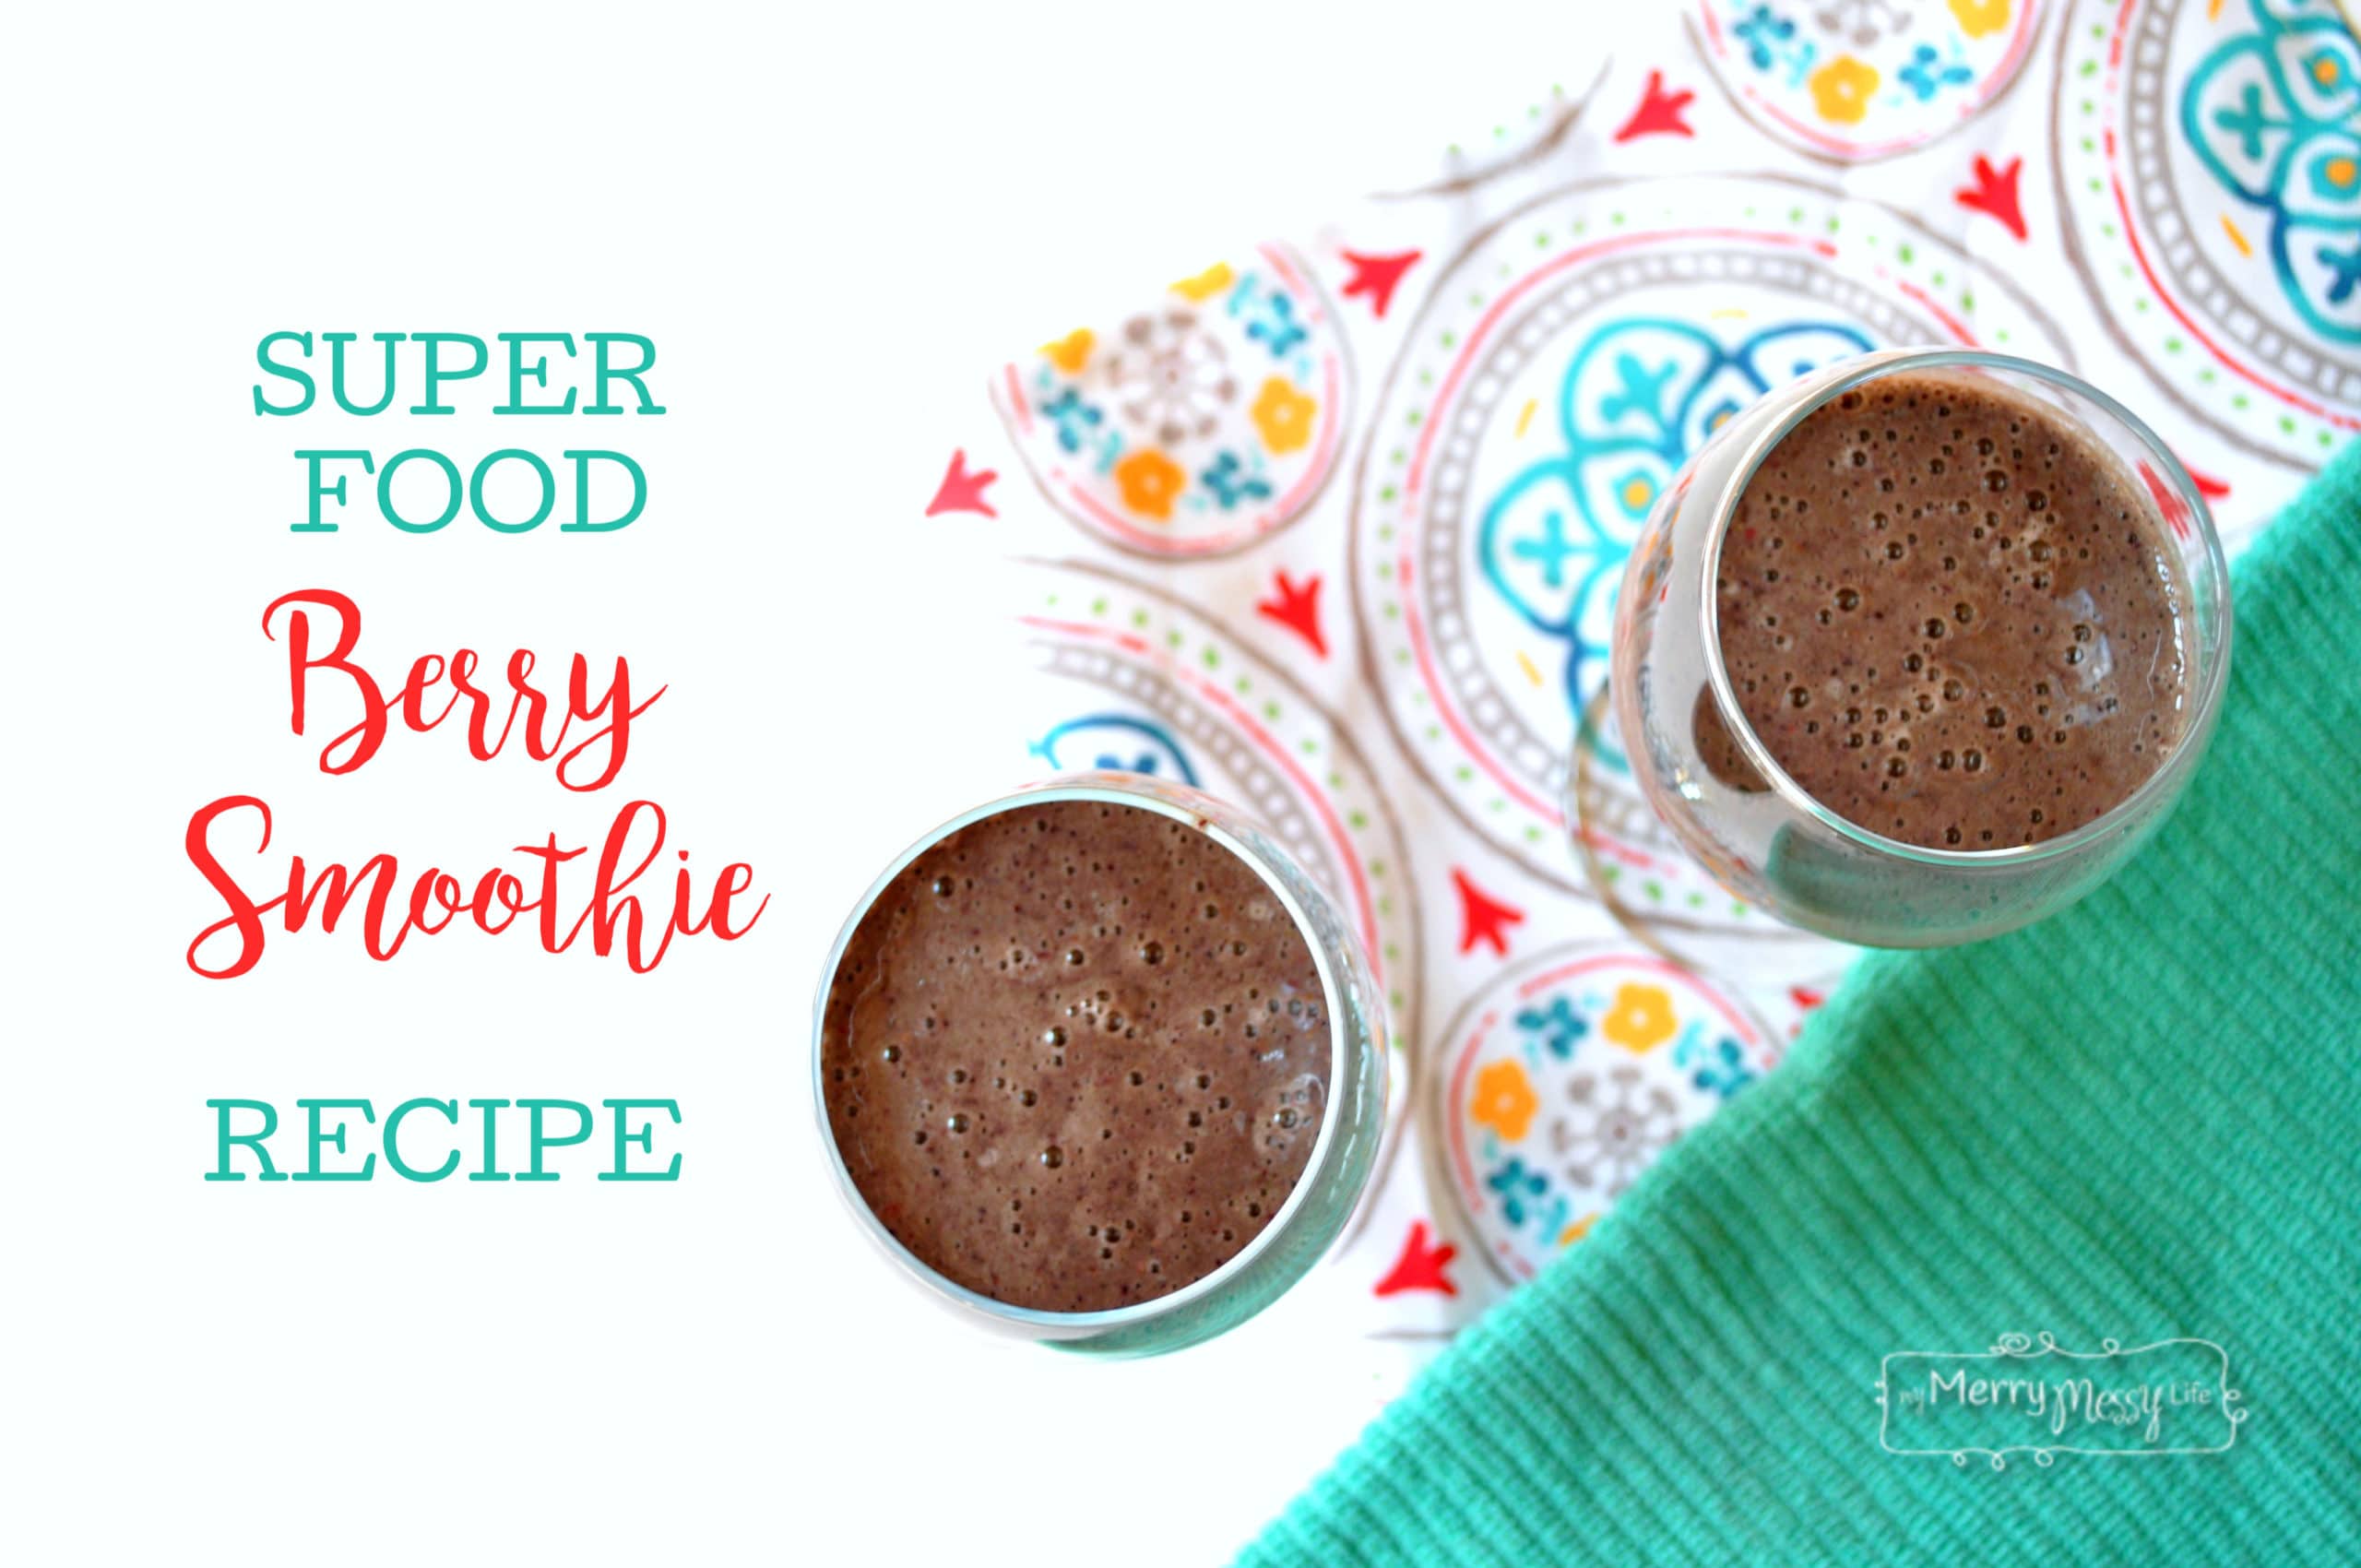 Superfood Berry Protein Smoothie Recipe - a smoothie that even kids will love! It's delicious and nutritious.